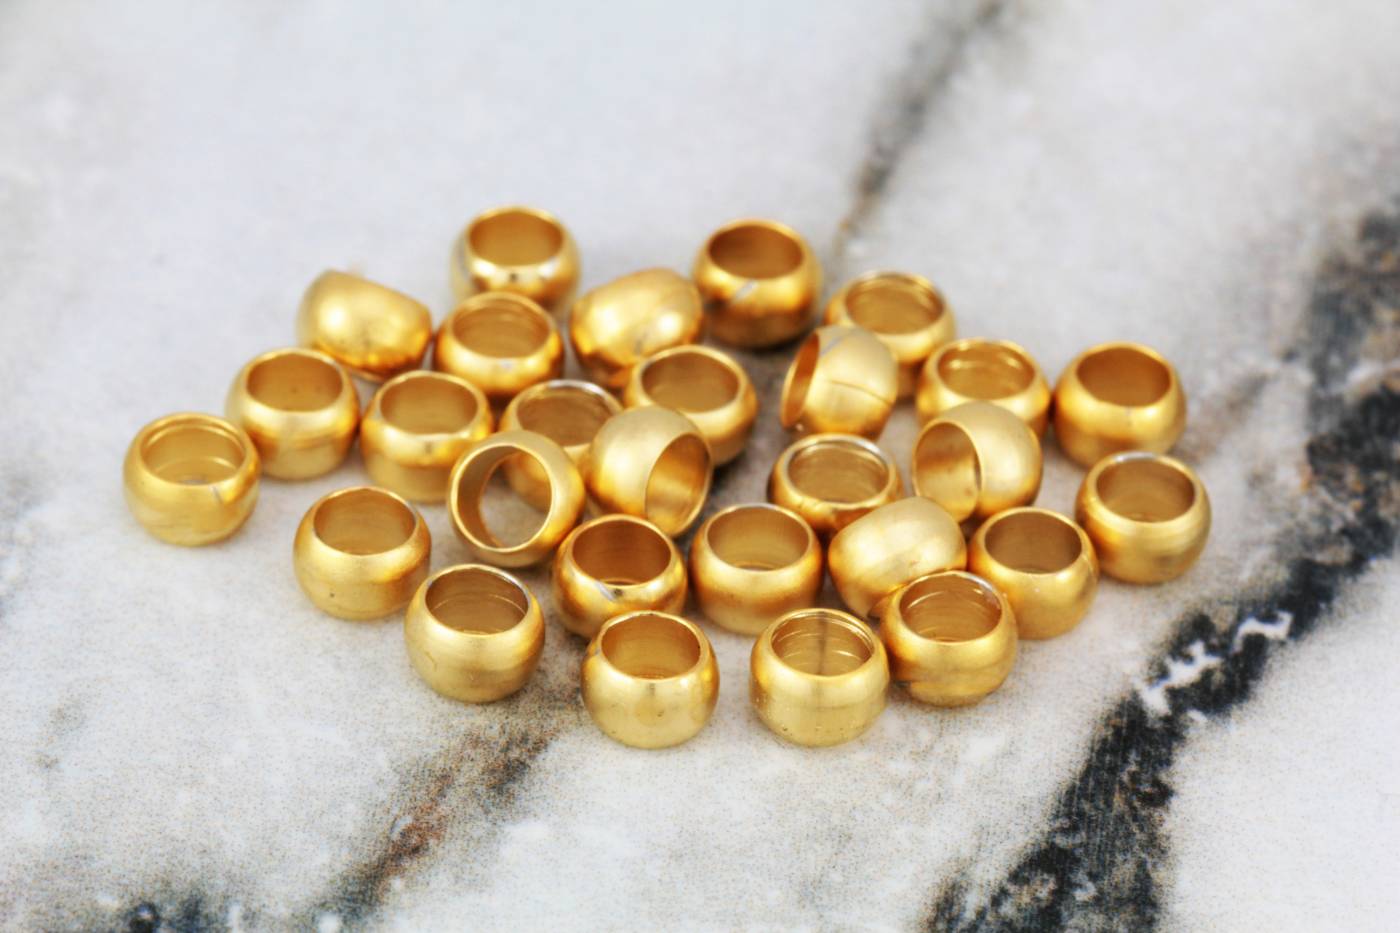 gold-brass-5mm-spacer-bead-findings